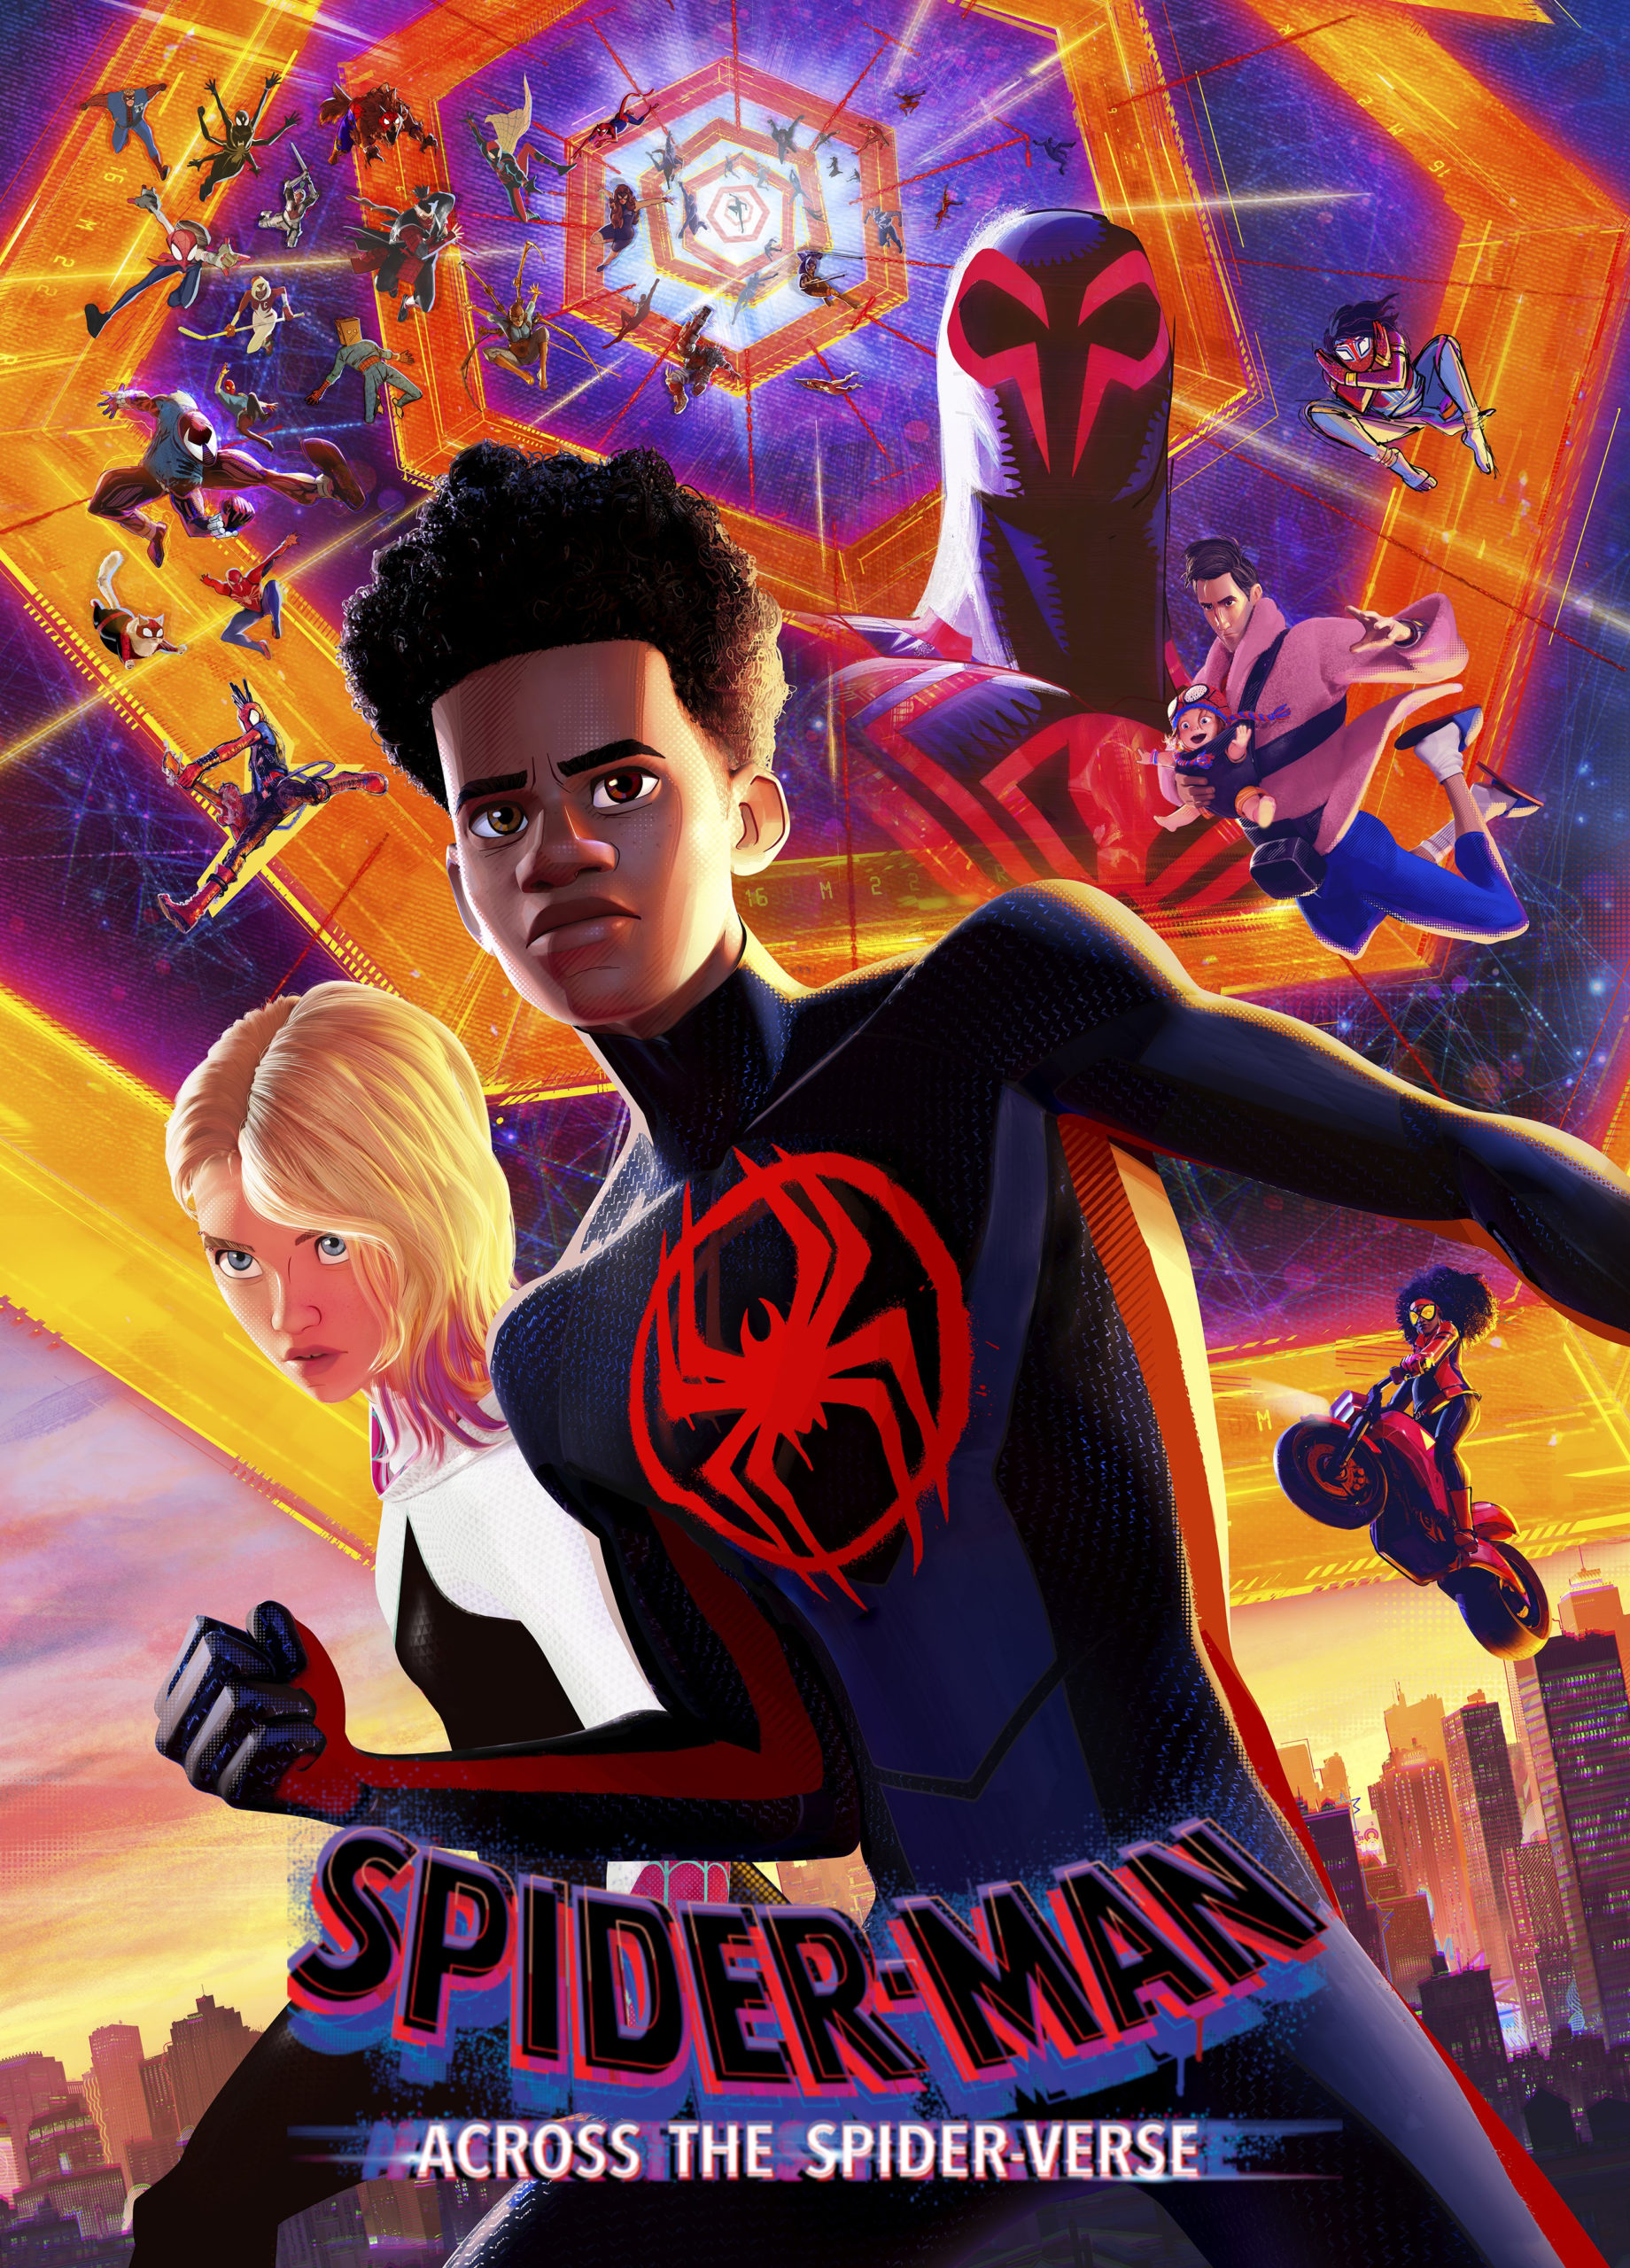 Spider-Man: Across the Spider-Verse Film Review